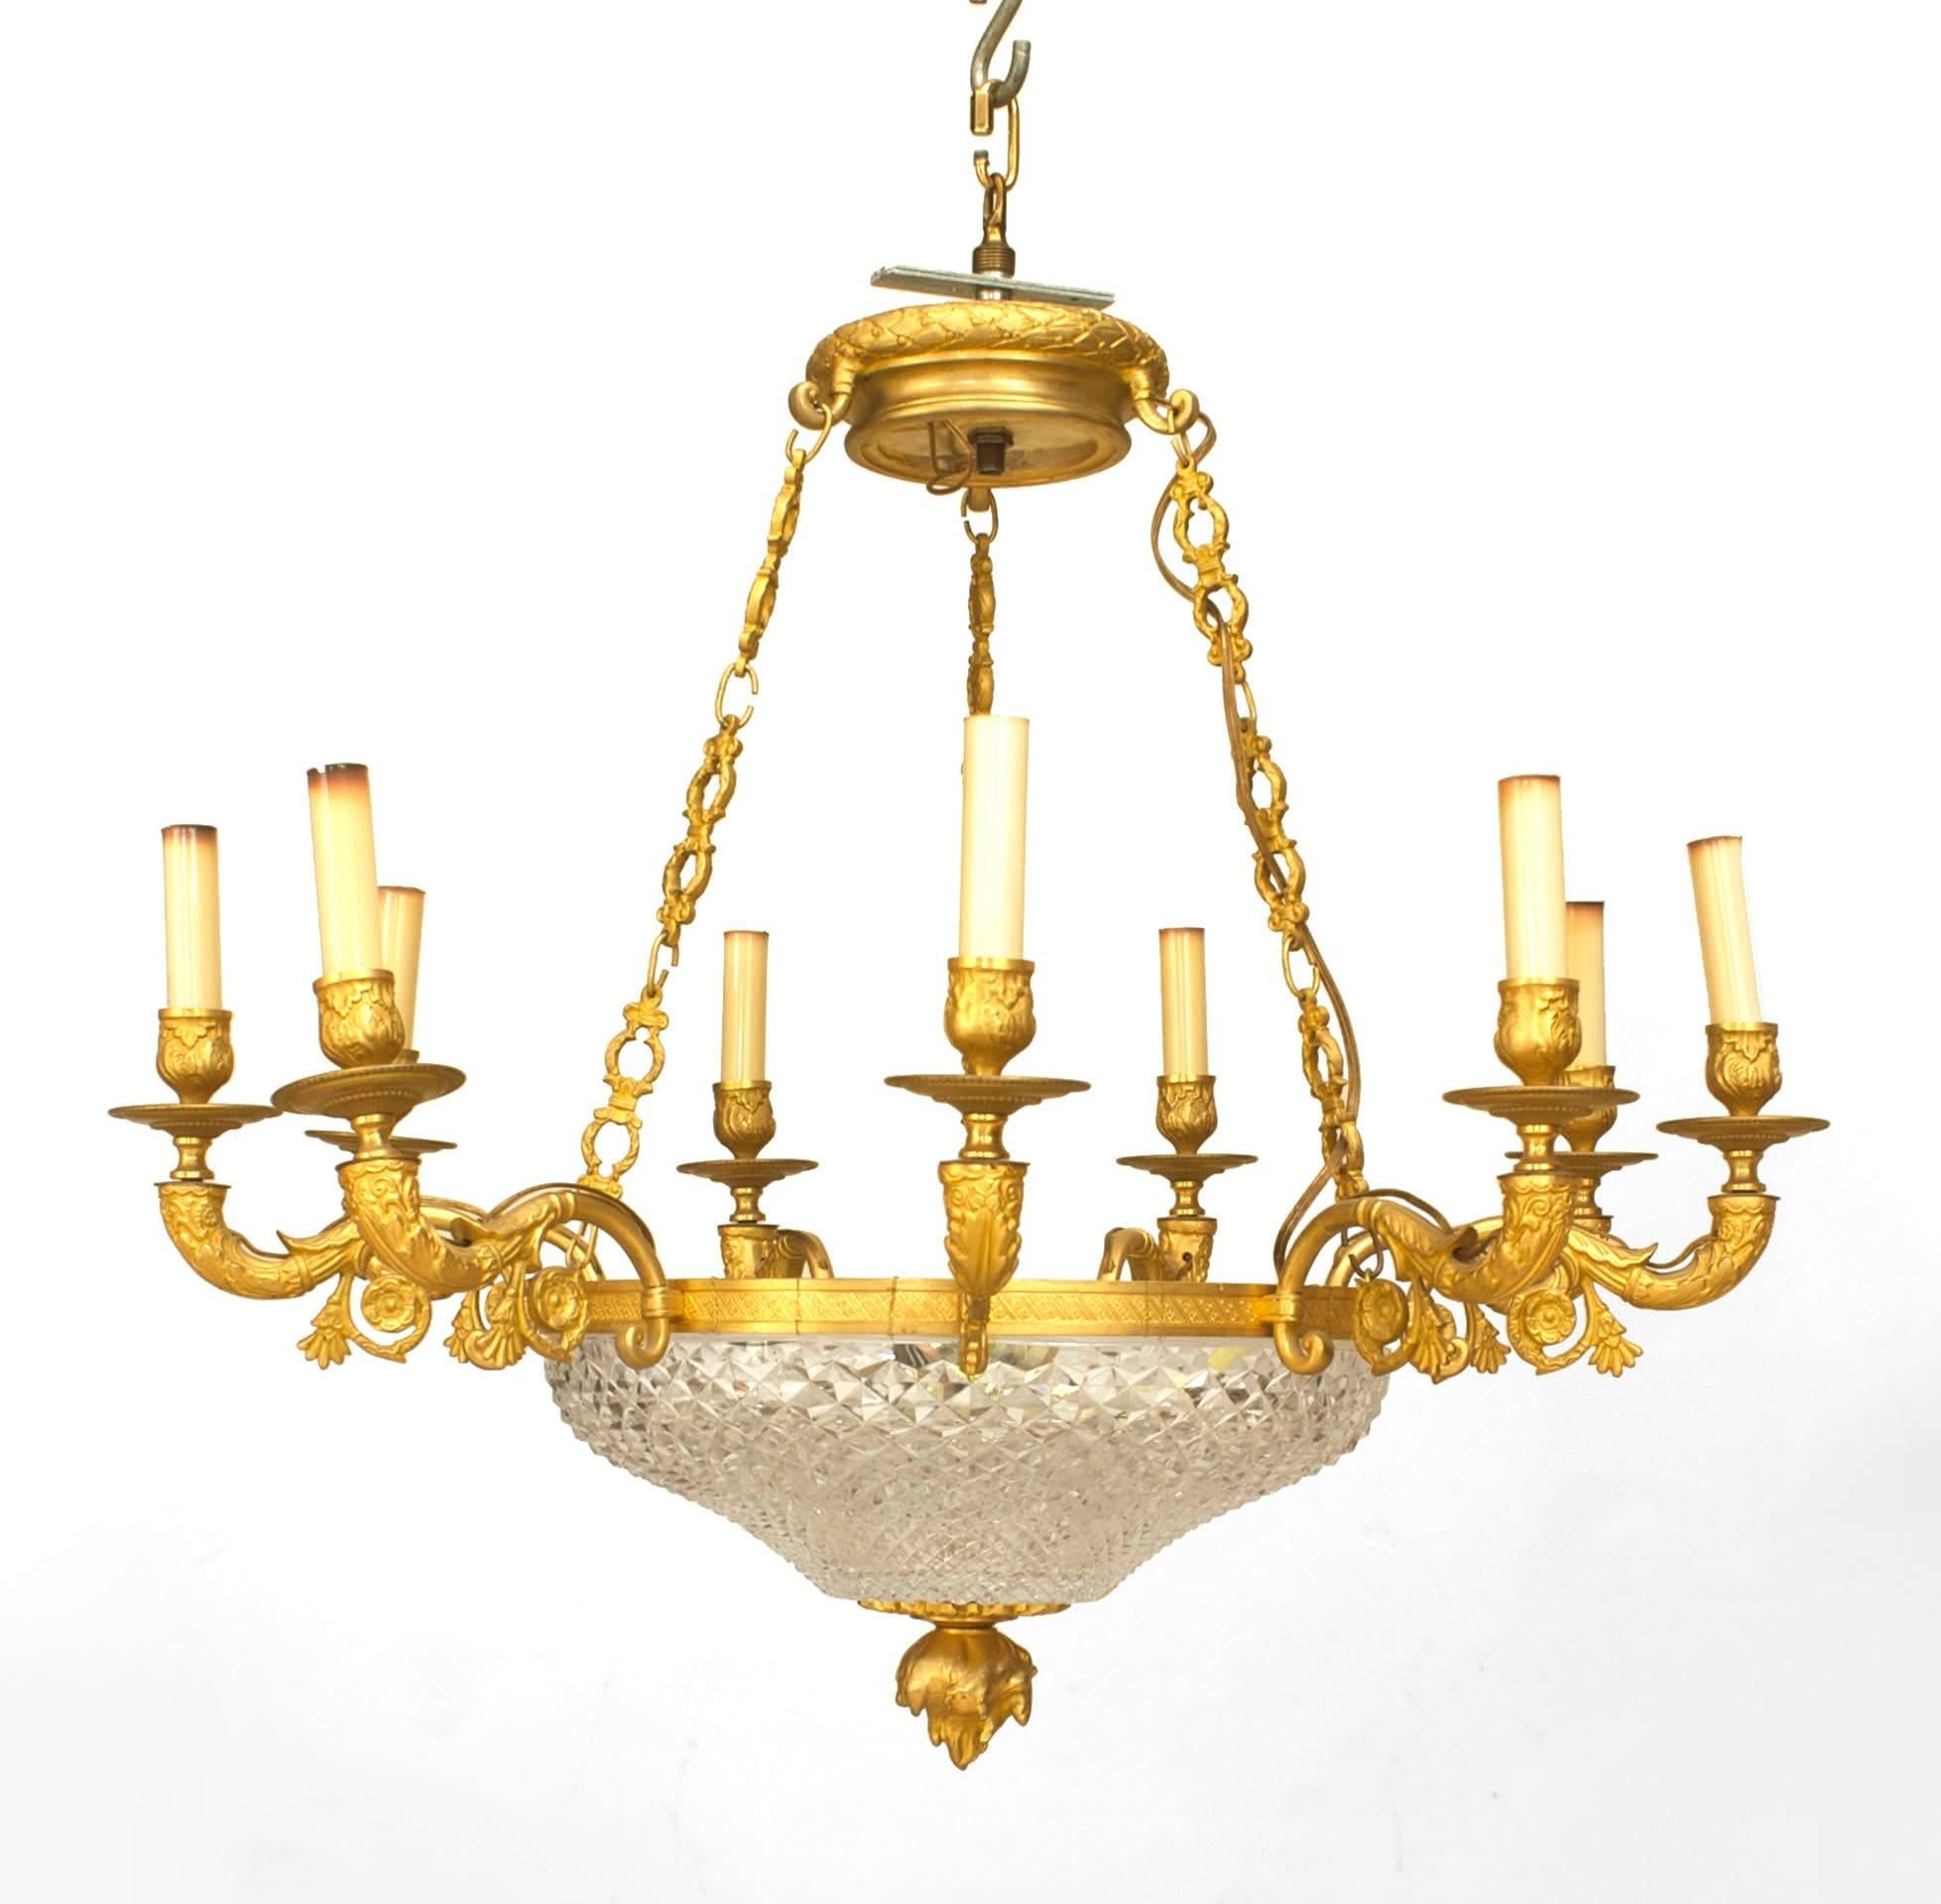 French Empire-style (late 19th Century) gilt bronze chandelier with a cut crystal bowl supporting a ring of 8 scroll arms suspended by 3 chains to a canopy with a flame final bottom.
